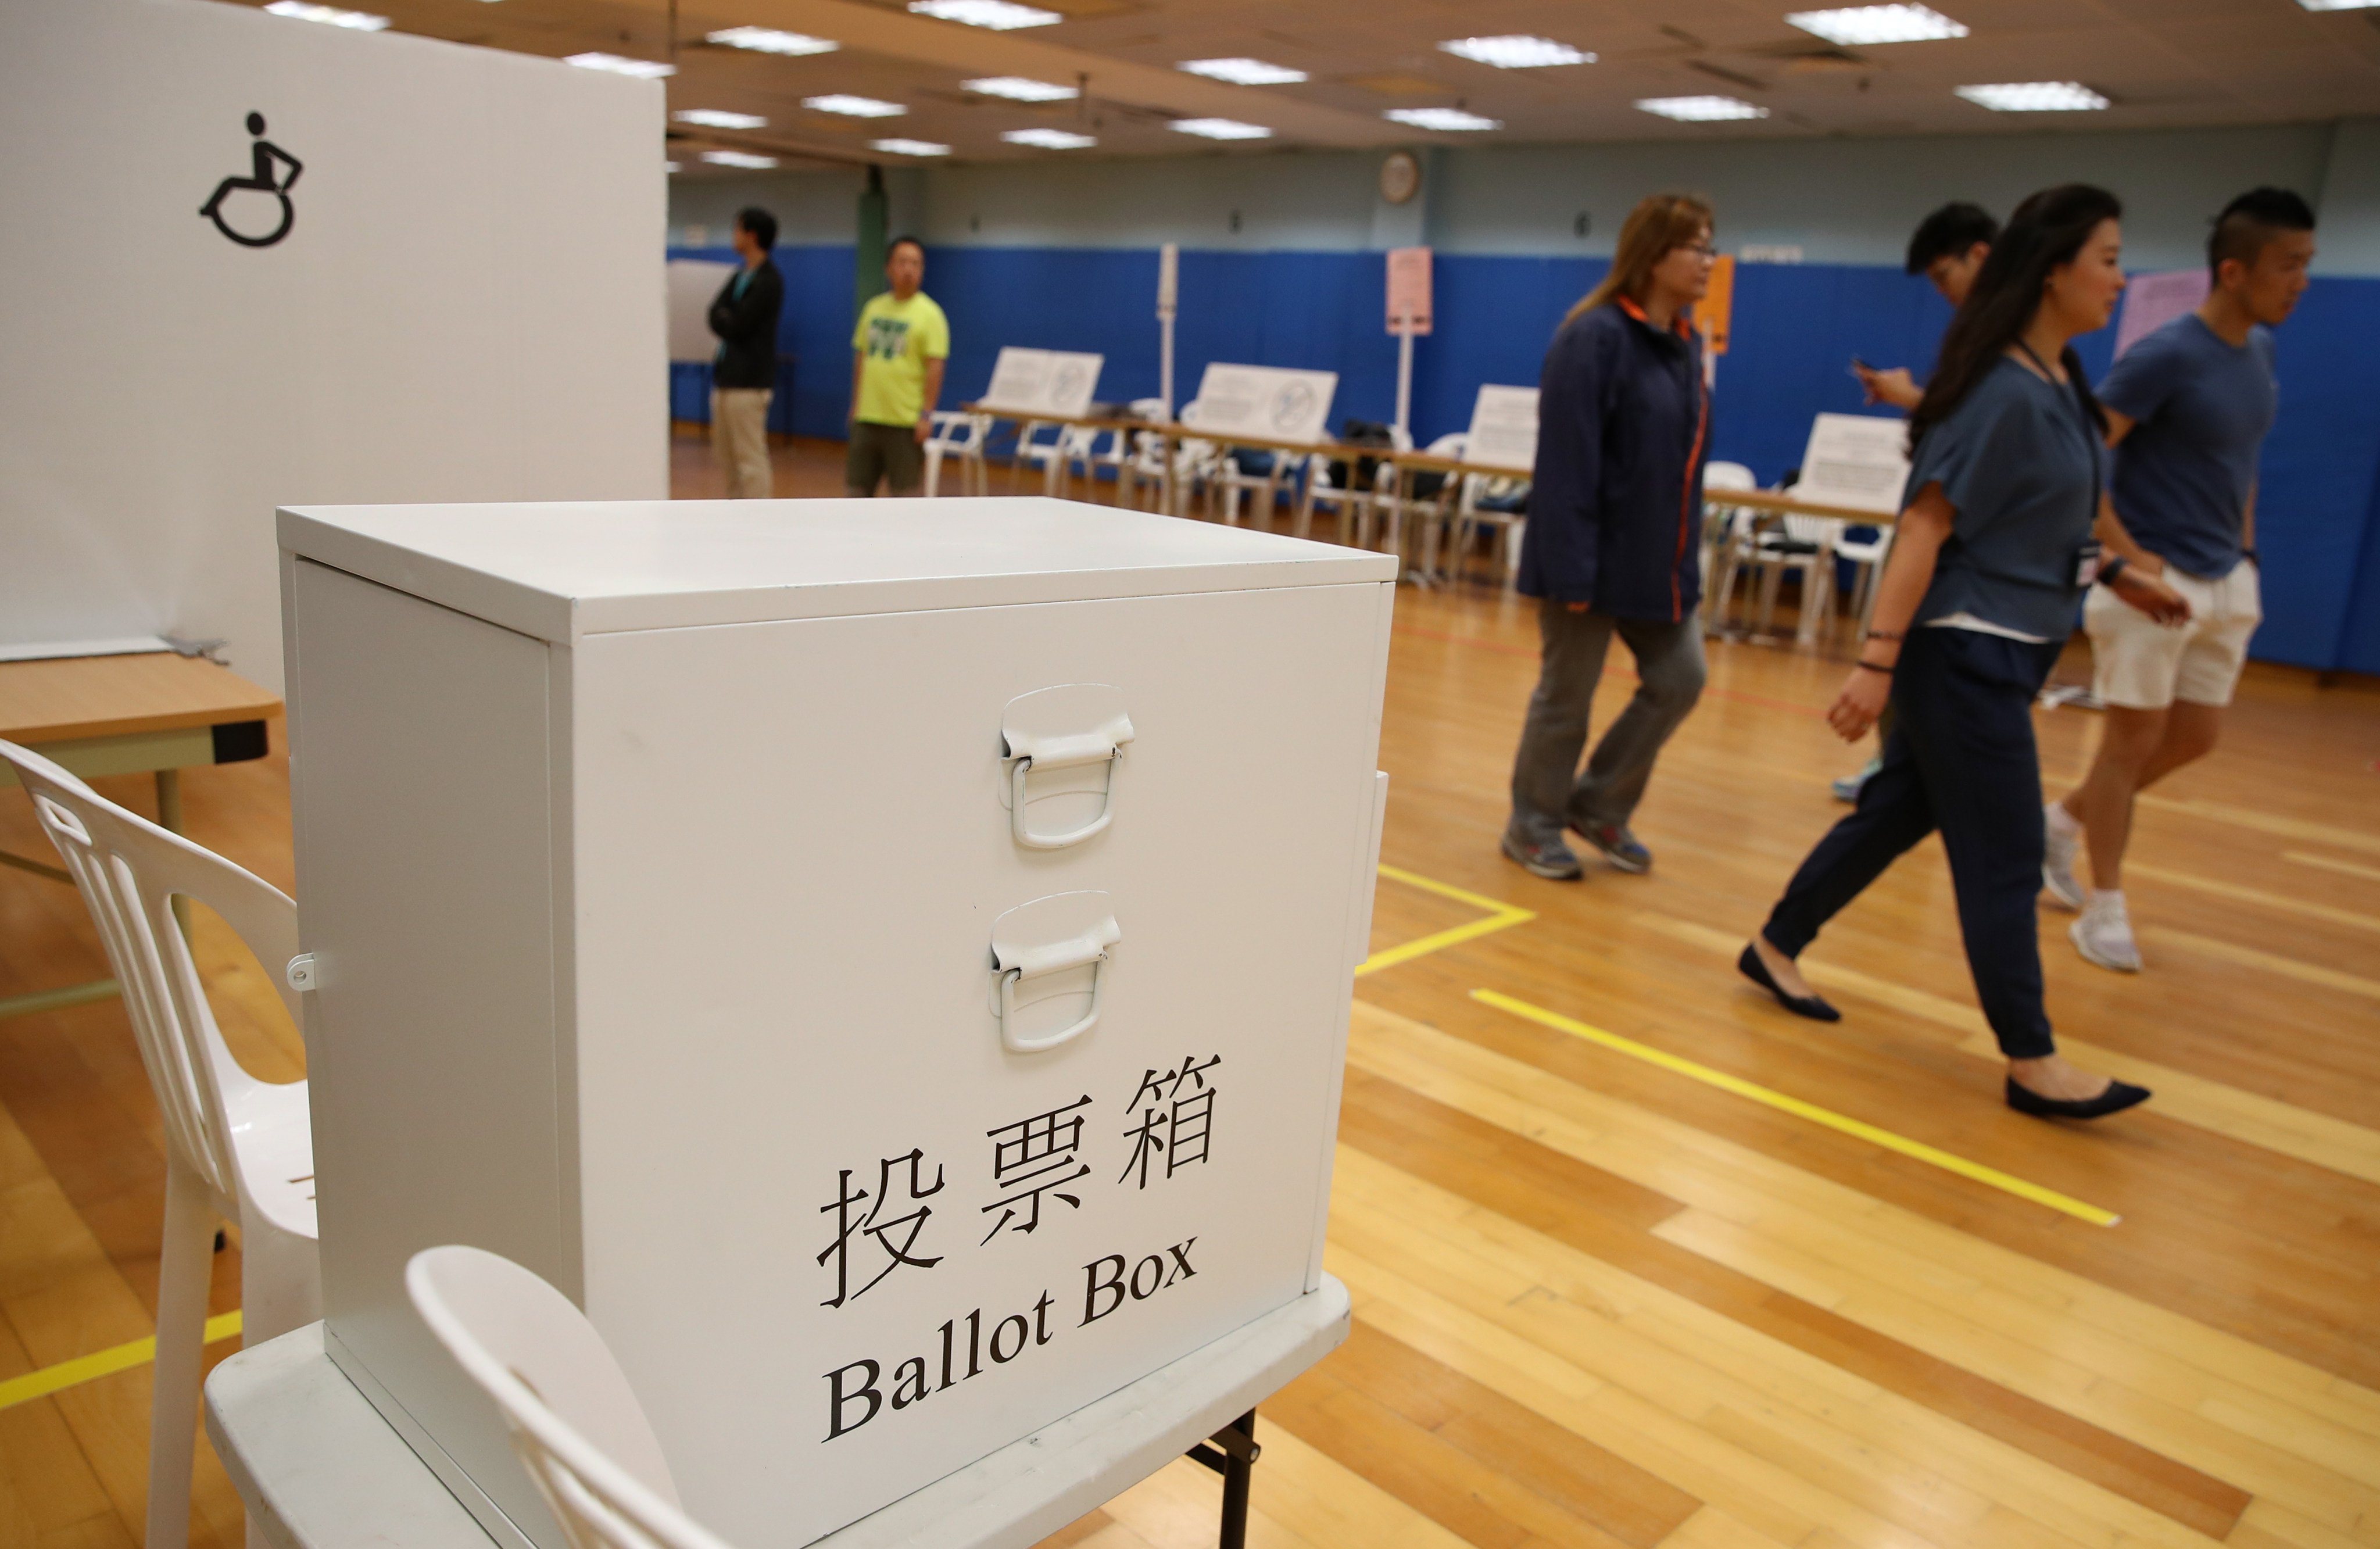 Authorities have set a quota of 38,000 spots at the two sites, which will be filled on a first-come, first-served basis, and subject to increases if the turnout is “very high”. Photo: Winson Wong